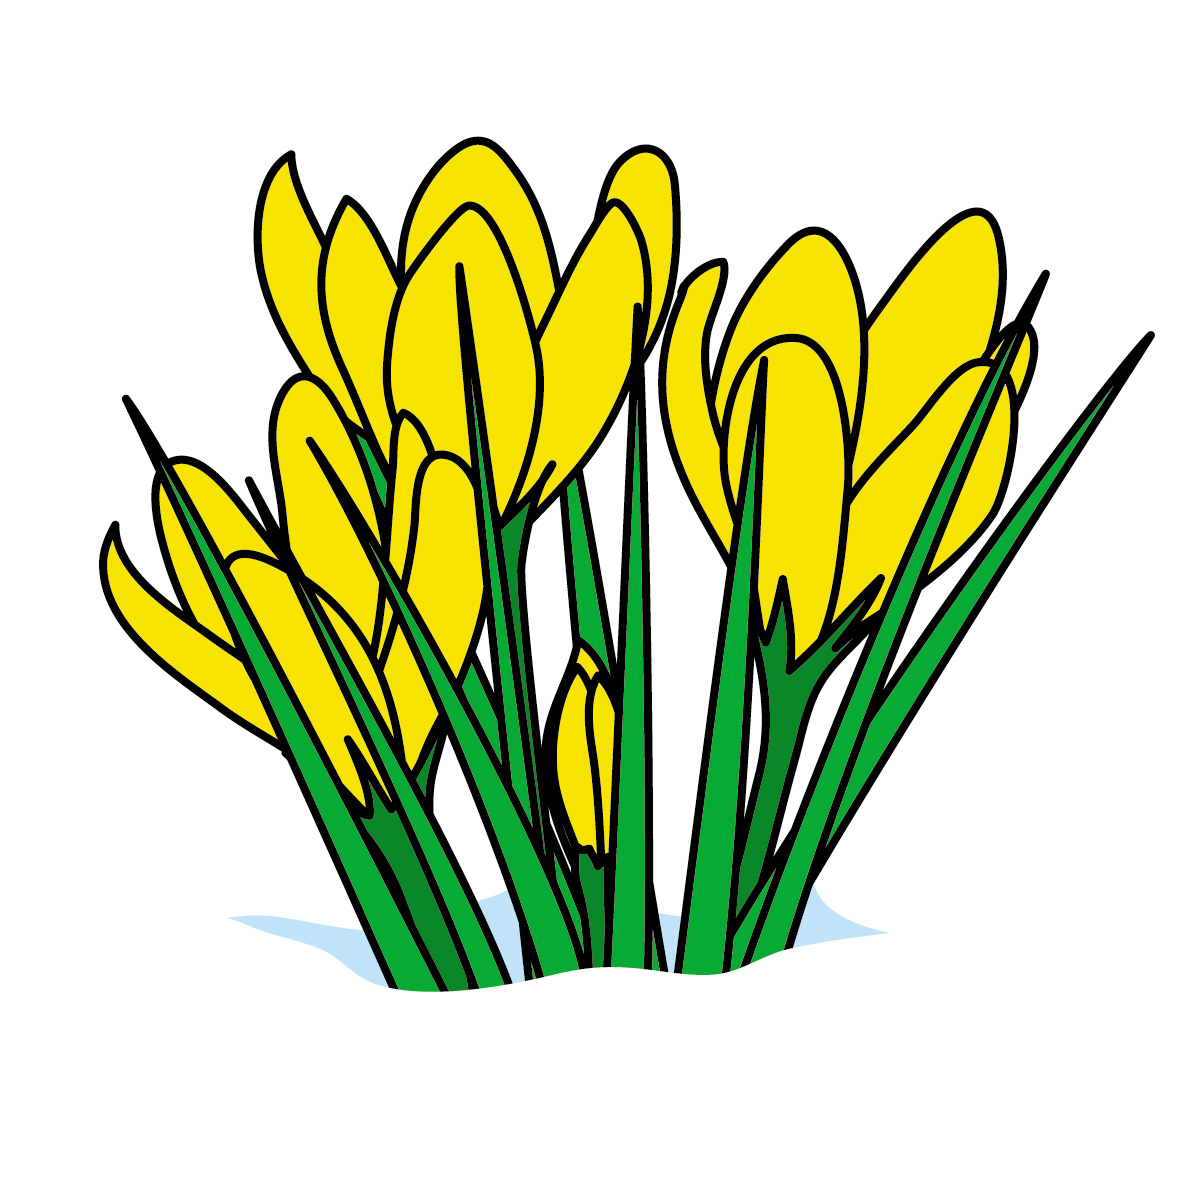 march clipart spring